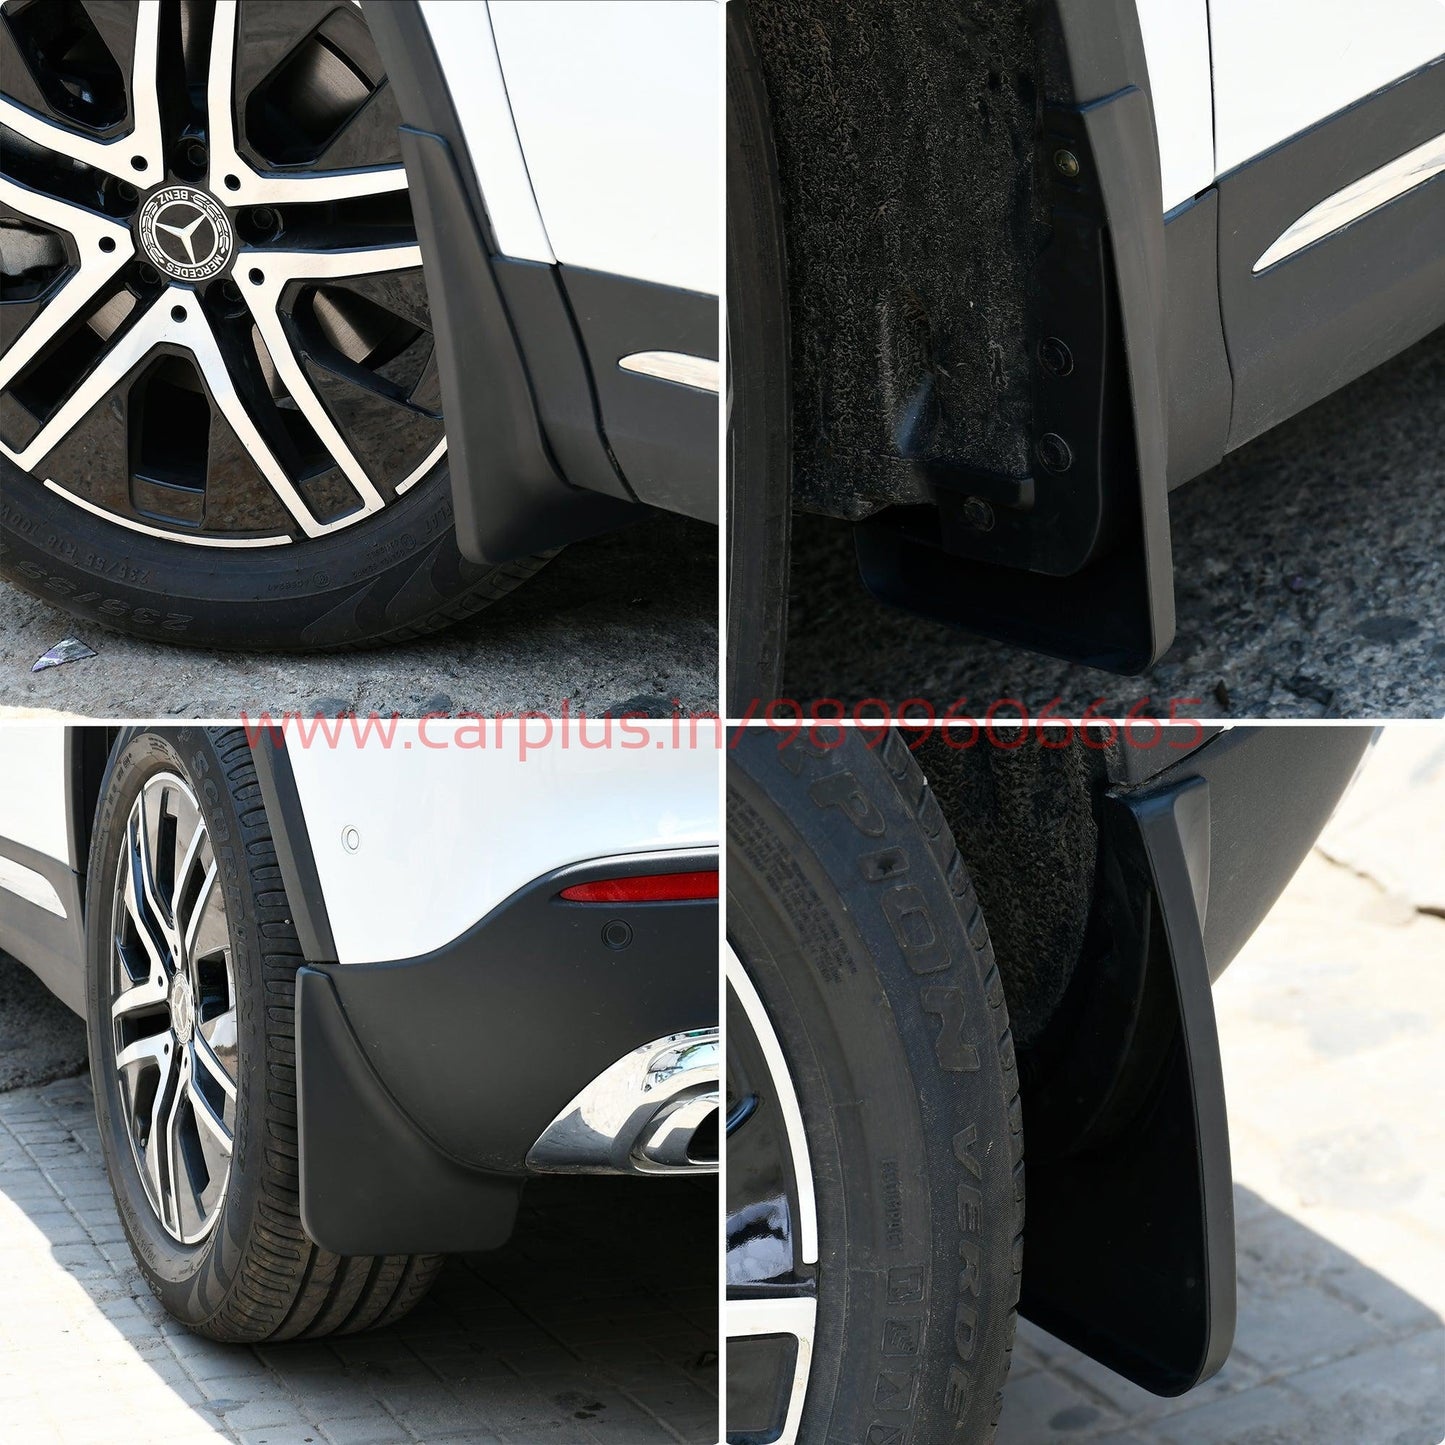 
                  
                    KMH Mud Flaps for Mercedes-Benz GLA Class H247 (2022)-MUD FLAPS-KMH-MUD FLAPS-CARPLUS
                  
                